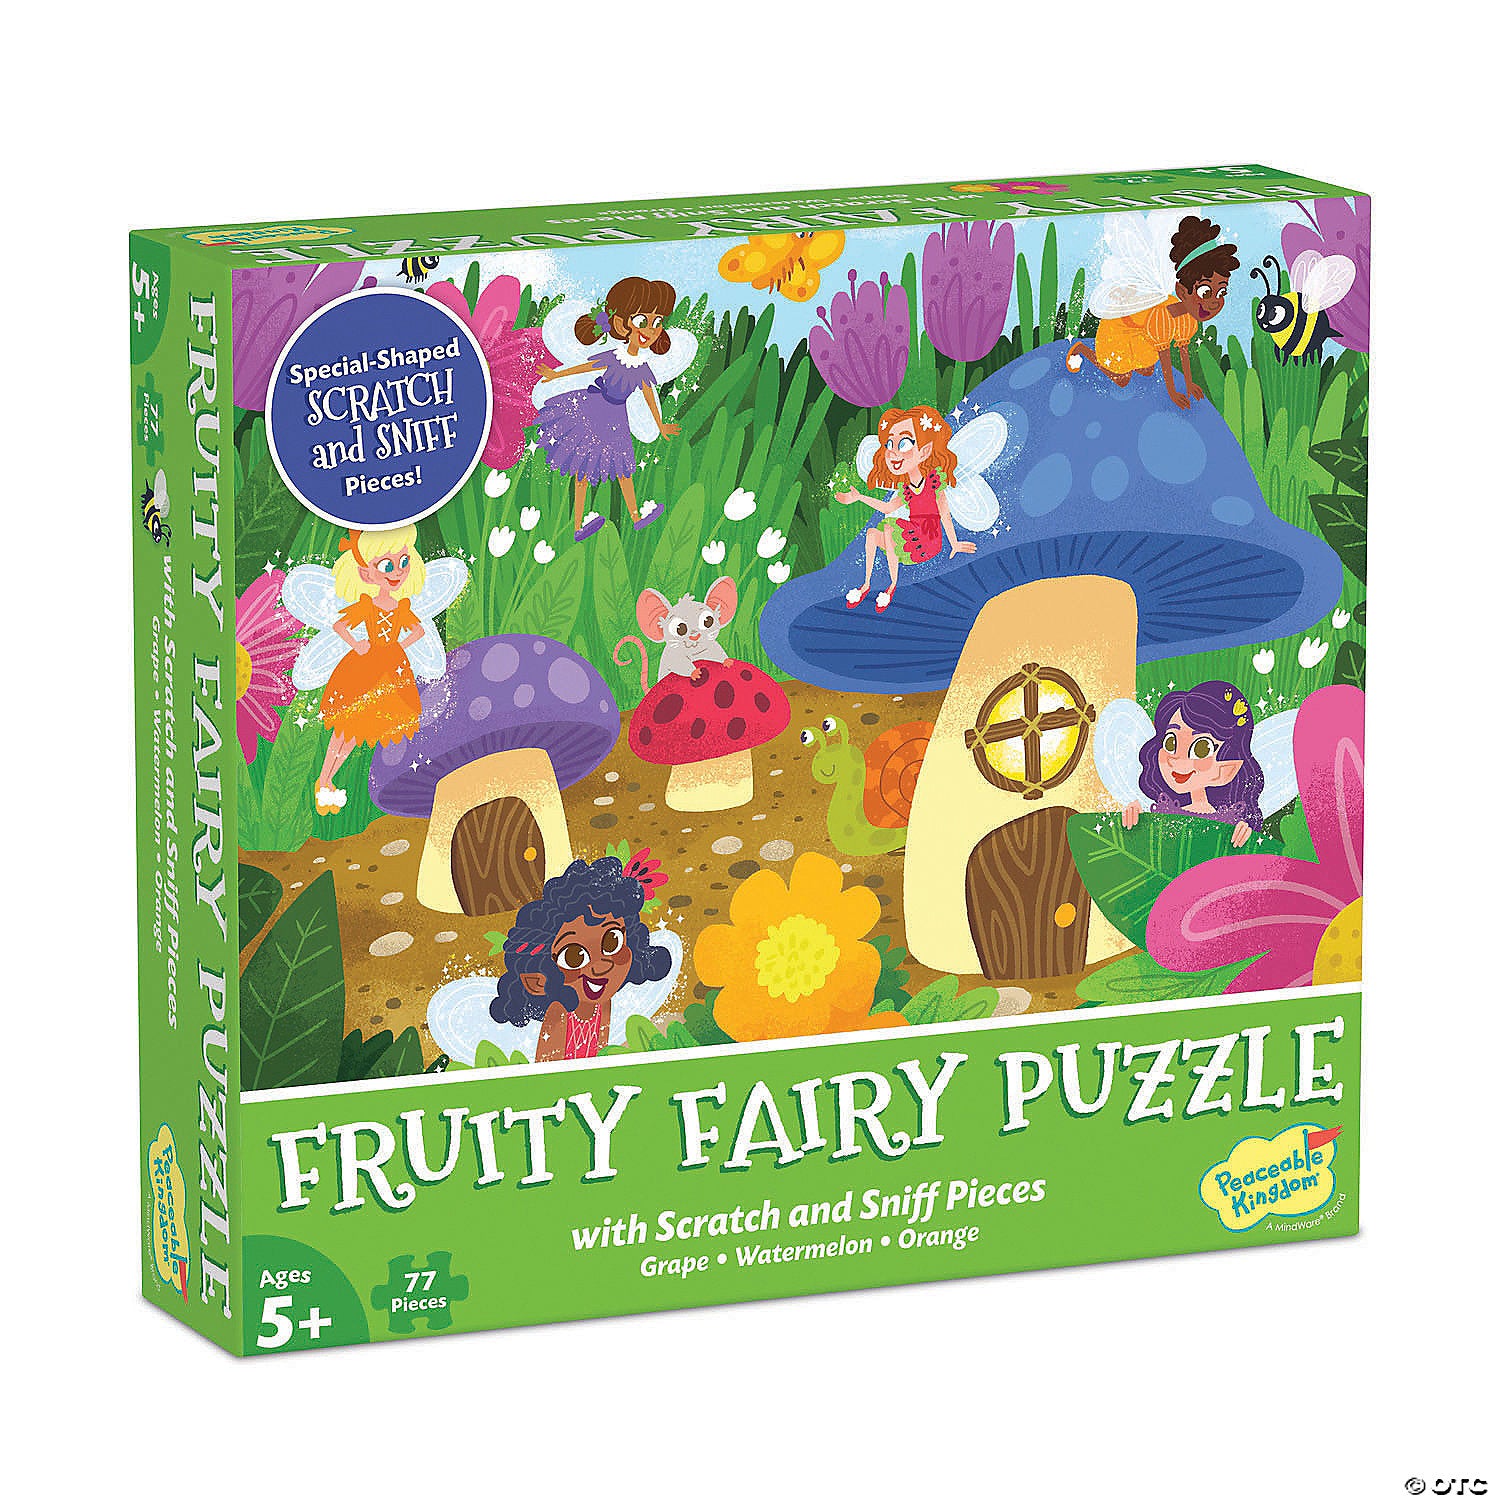 Scratch and Sniff Fruity Fairy Puzzle by Peaceable Kingdom #PZ30